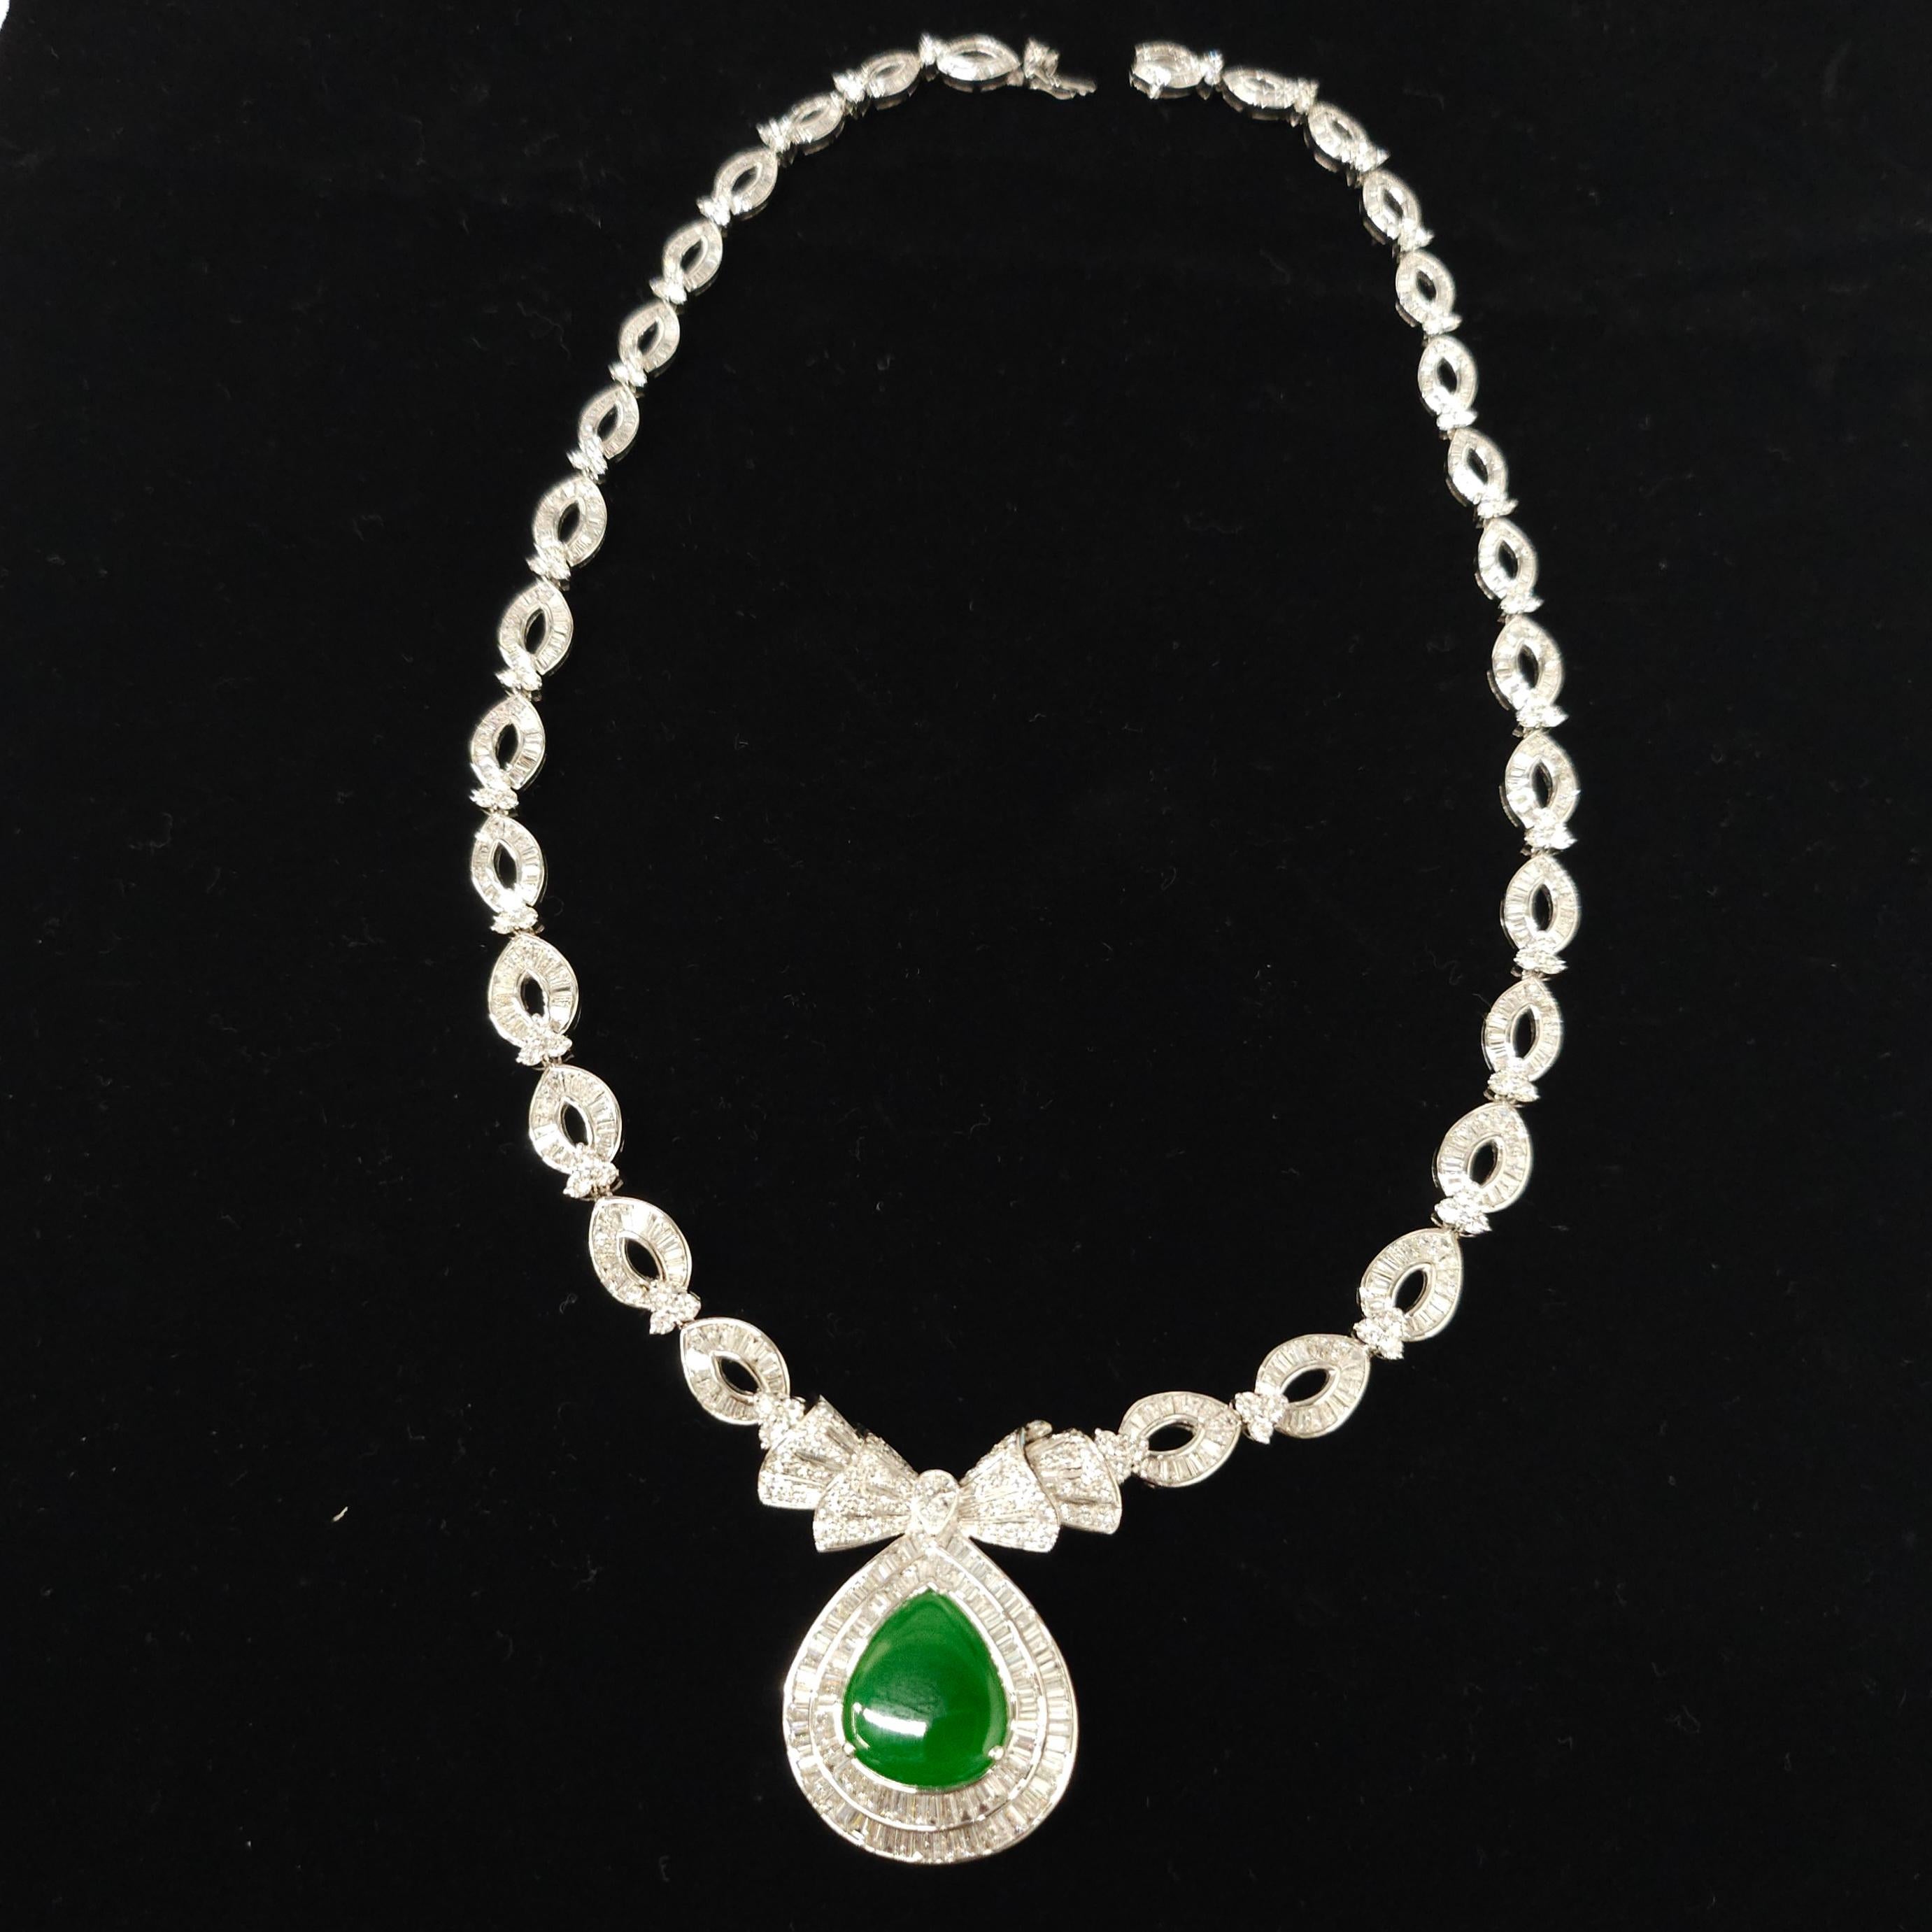 Certified Untreated Jadite Jade and 18Ct Diamond Necklace Brooch 18K White Gold For Sale 1